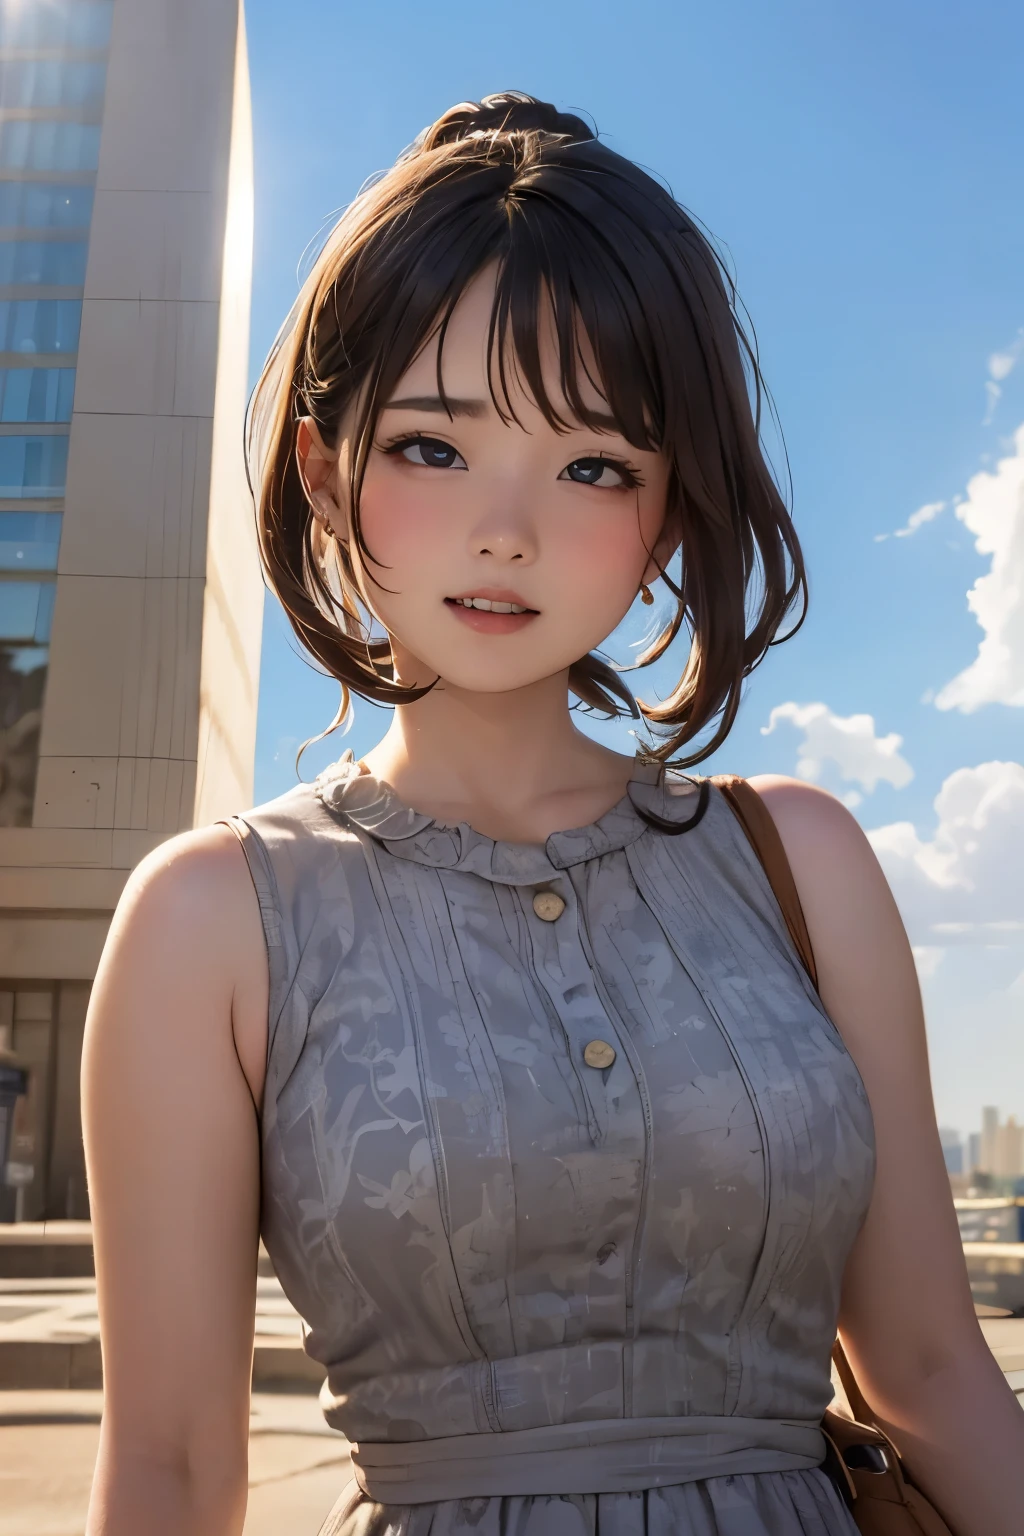 high-definition image, (((round face))), eyes realistic sizing, realistic skin, drooping eyes, smiling, ((various patterned feminine casual long dress)), (strong sunlight, old fashion), skyscrapers, hair up,